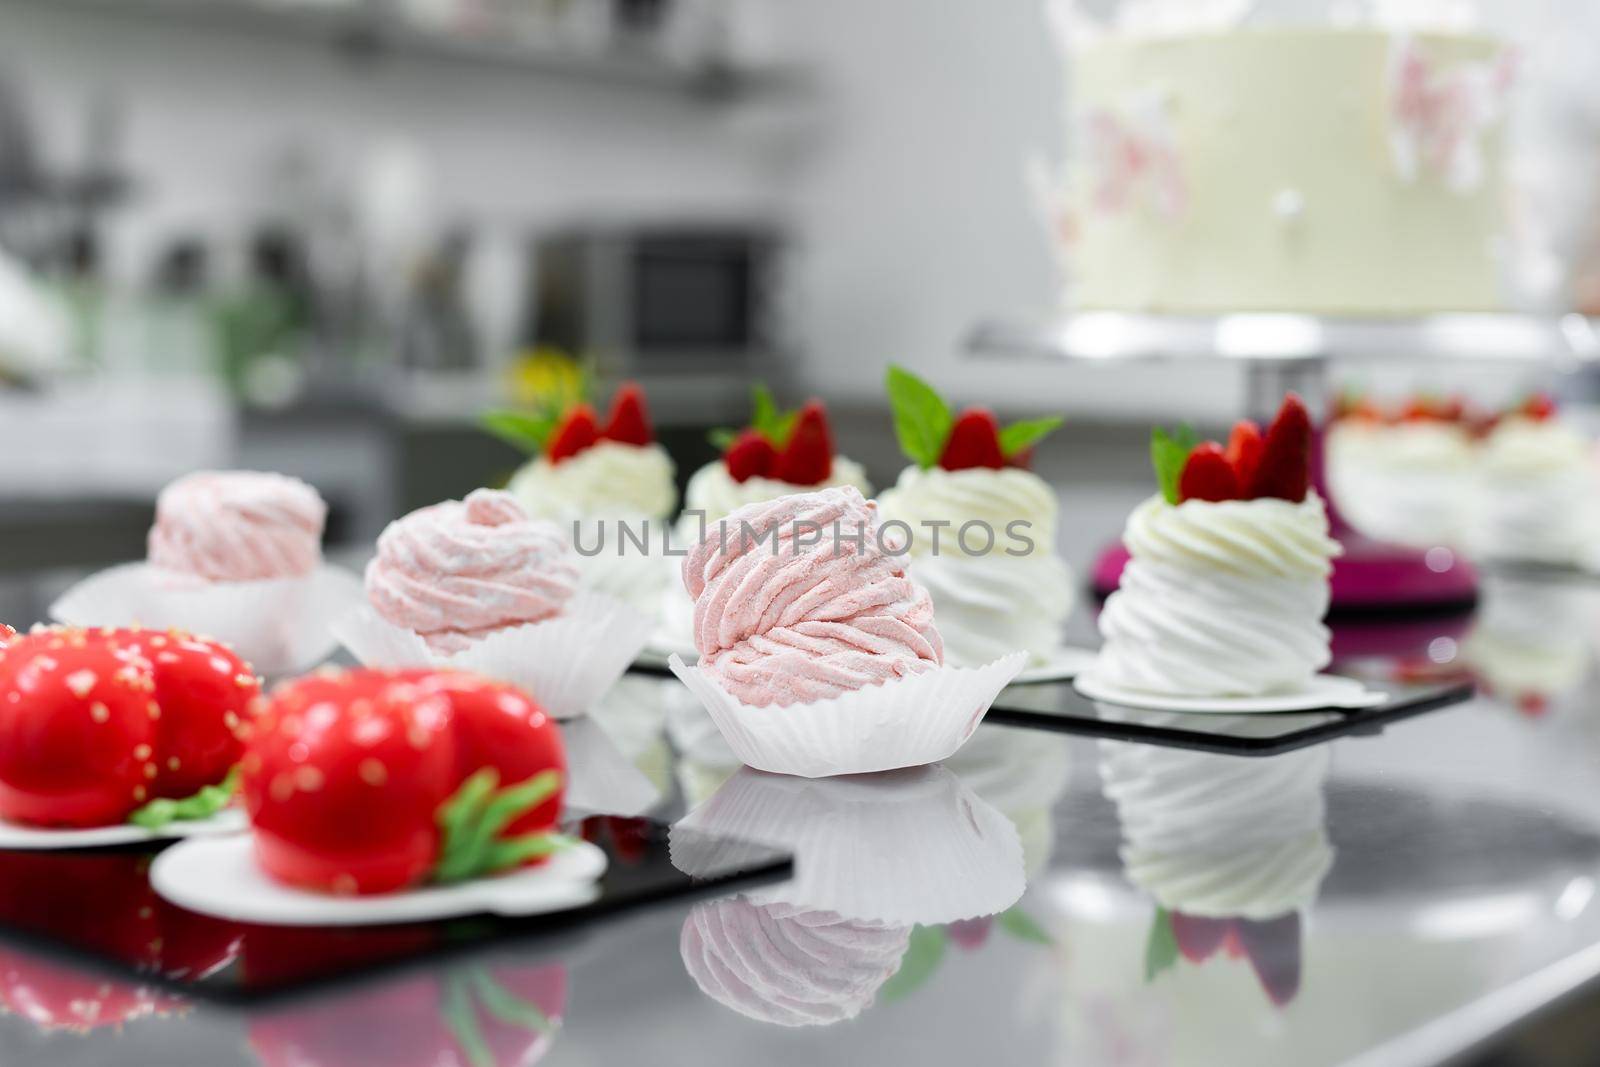 Pavlova meringue, marshmallows and mousse cake on the table in the pastry shop by StudioPeace